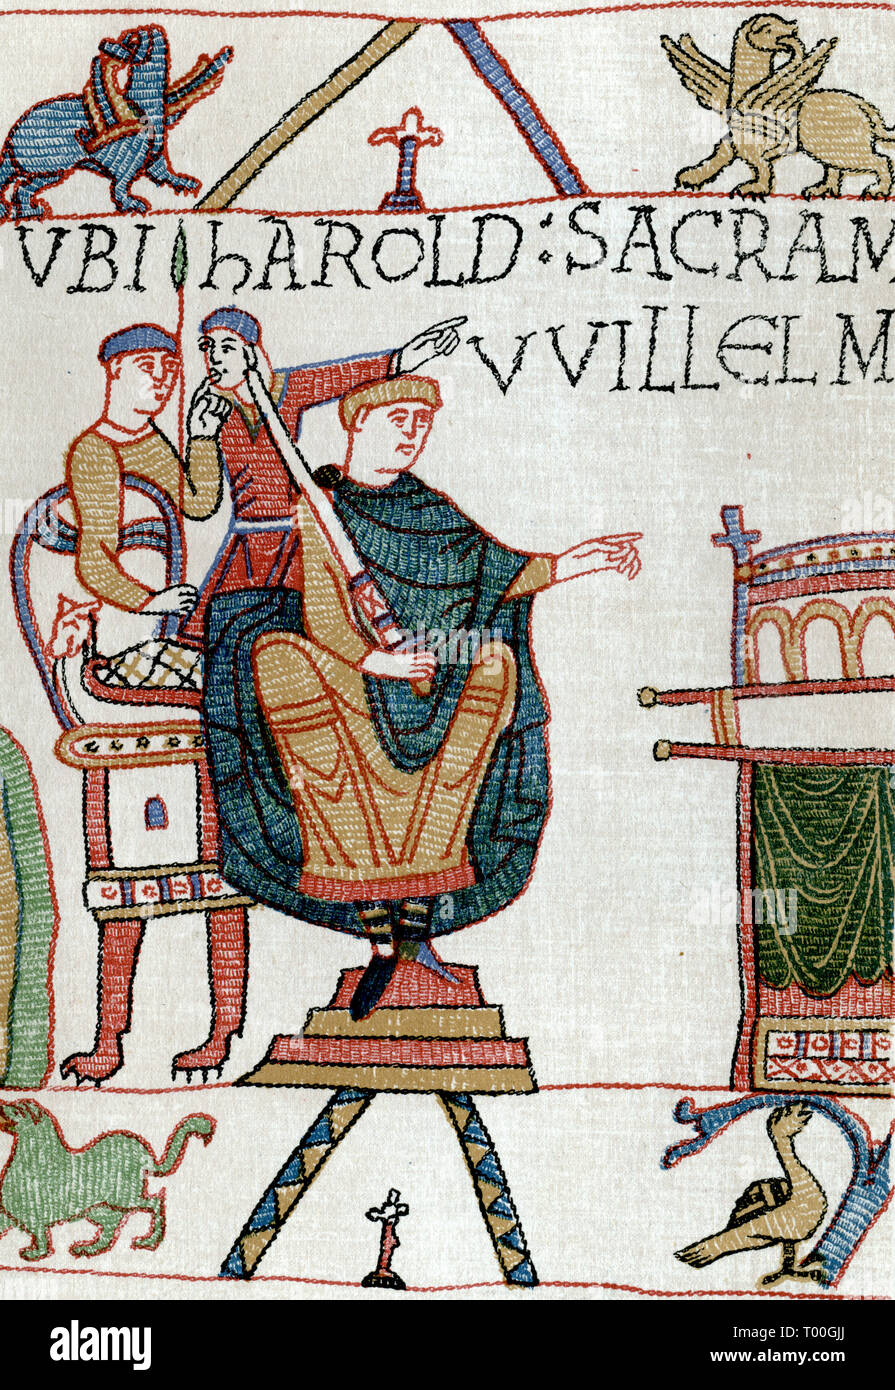 William receiving Harold's Oath. HAROLD SACRAMENTUM FECIT VVILLELMO DUCI (Harold made an oath to Duke William). This scene took place at Bagia (Bayeux, probably in Bayeux Cathedral).  The Bayeux Tapestry is an embroidered cloth measuring approx 70 metres (230 ft) long and 50 centimetres (20 in) tall. It depicts the events leading up to the Norman conquest of England concerning William, Duke of Normandy, and Harold, Earl of Wessex, later King of England, and culminating in the Battle of Hastings. Stock Photo